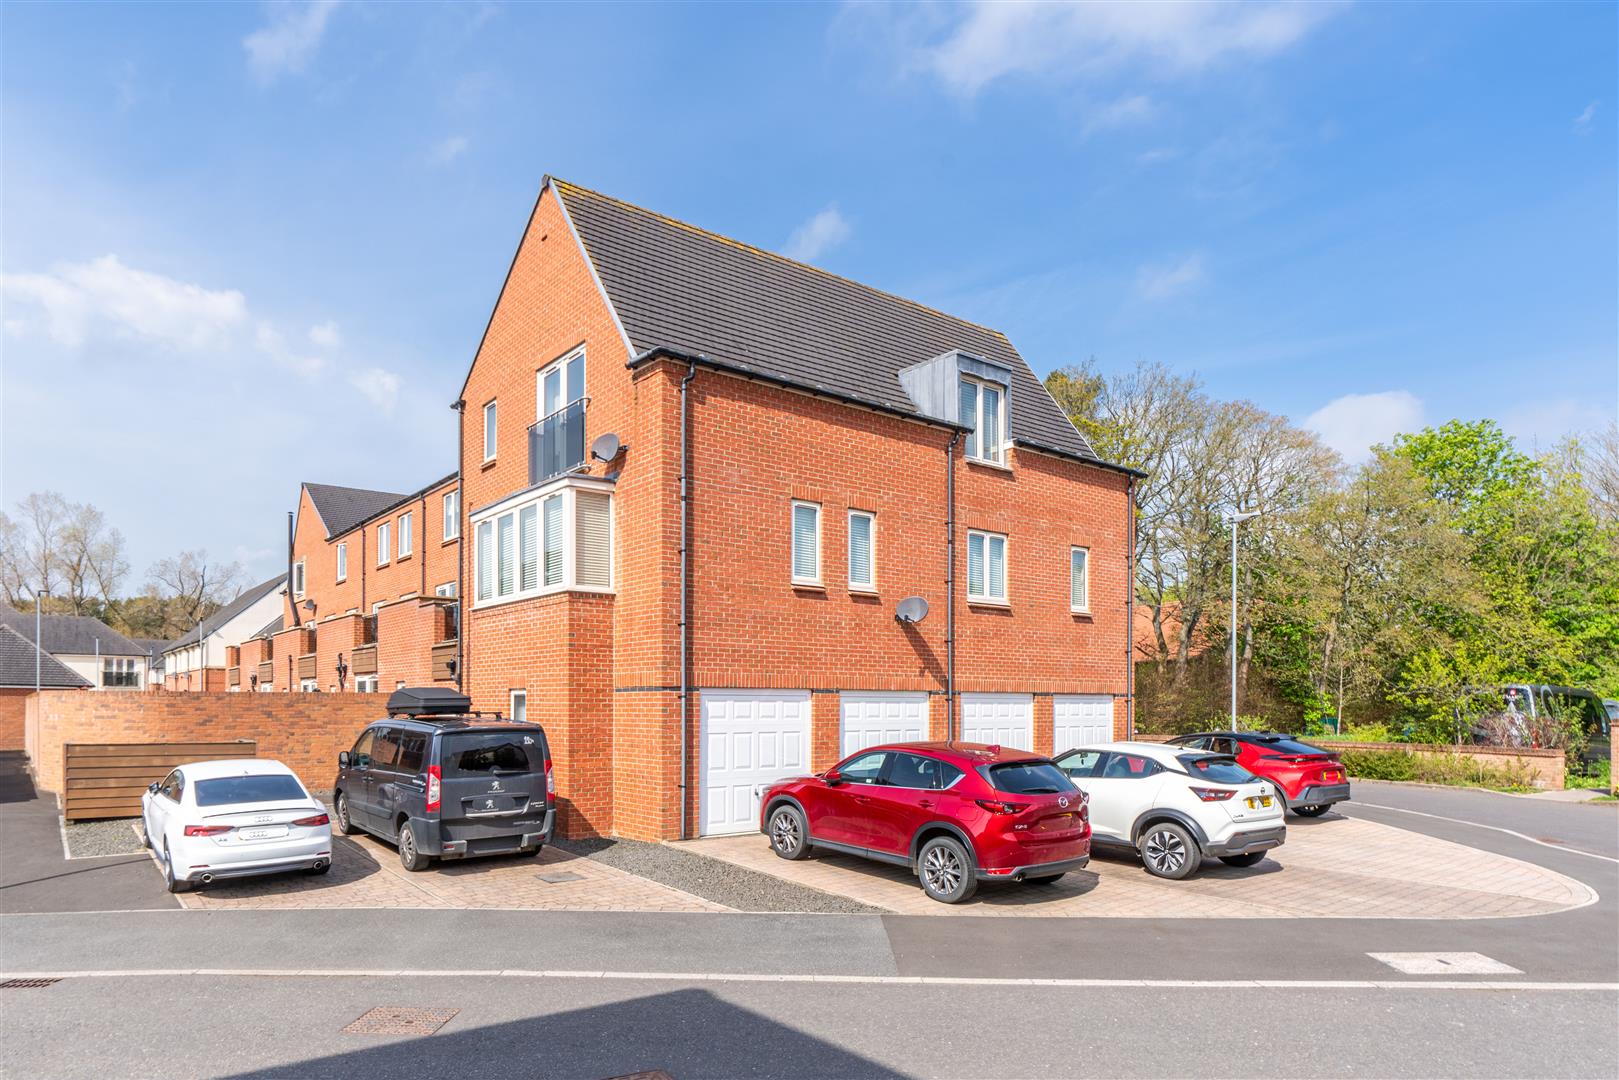 2 bed apartment for sale in St. Mary Lane, Morpeth, NE61